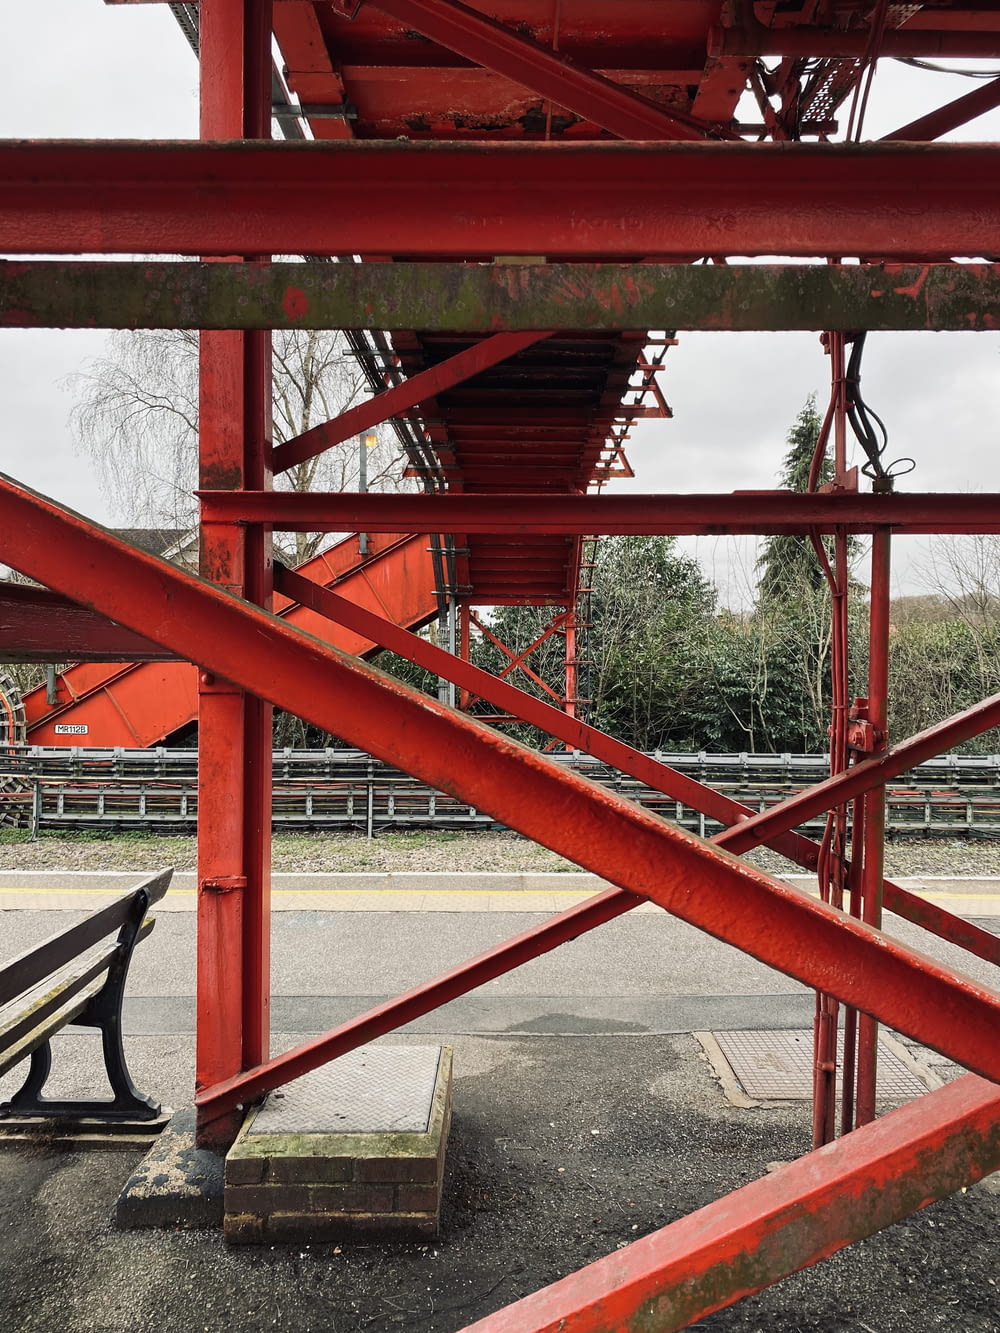 a red metal structure with a bench underneath it